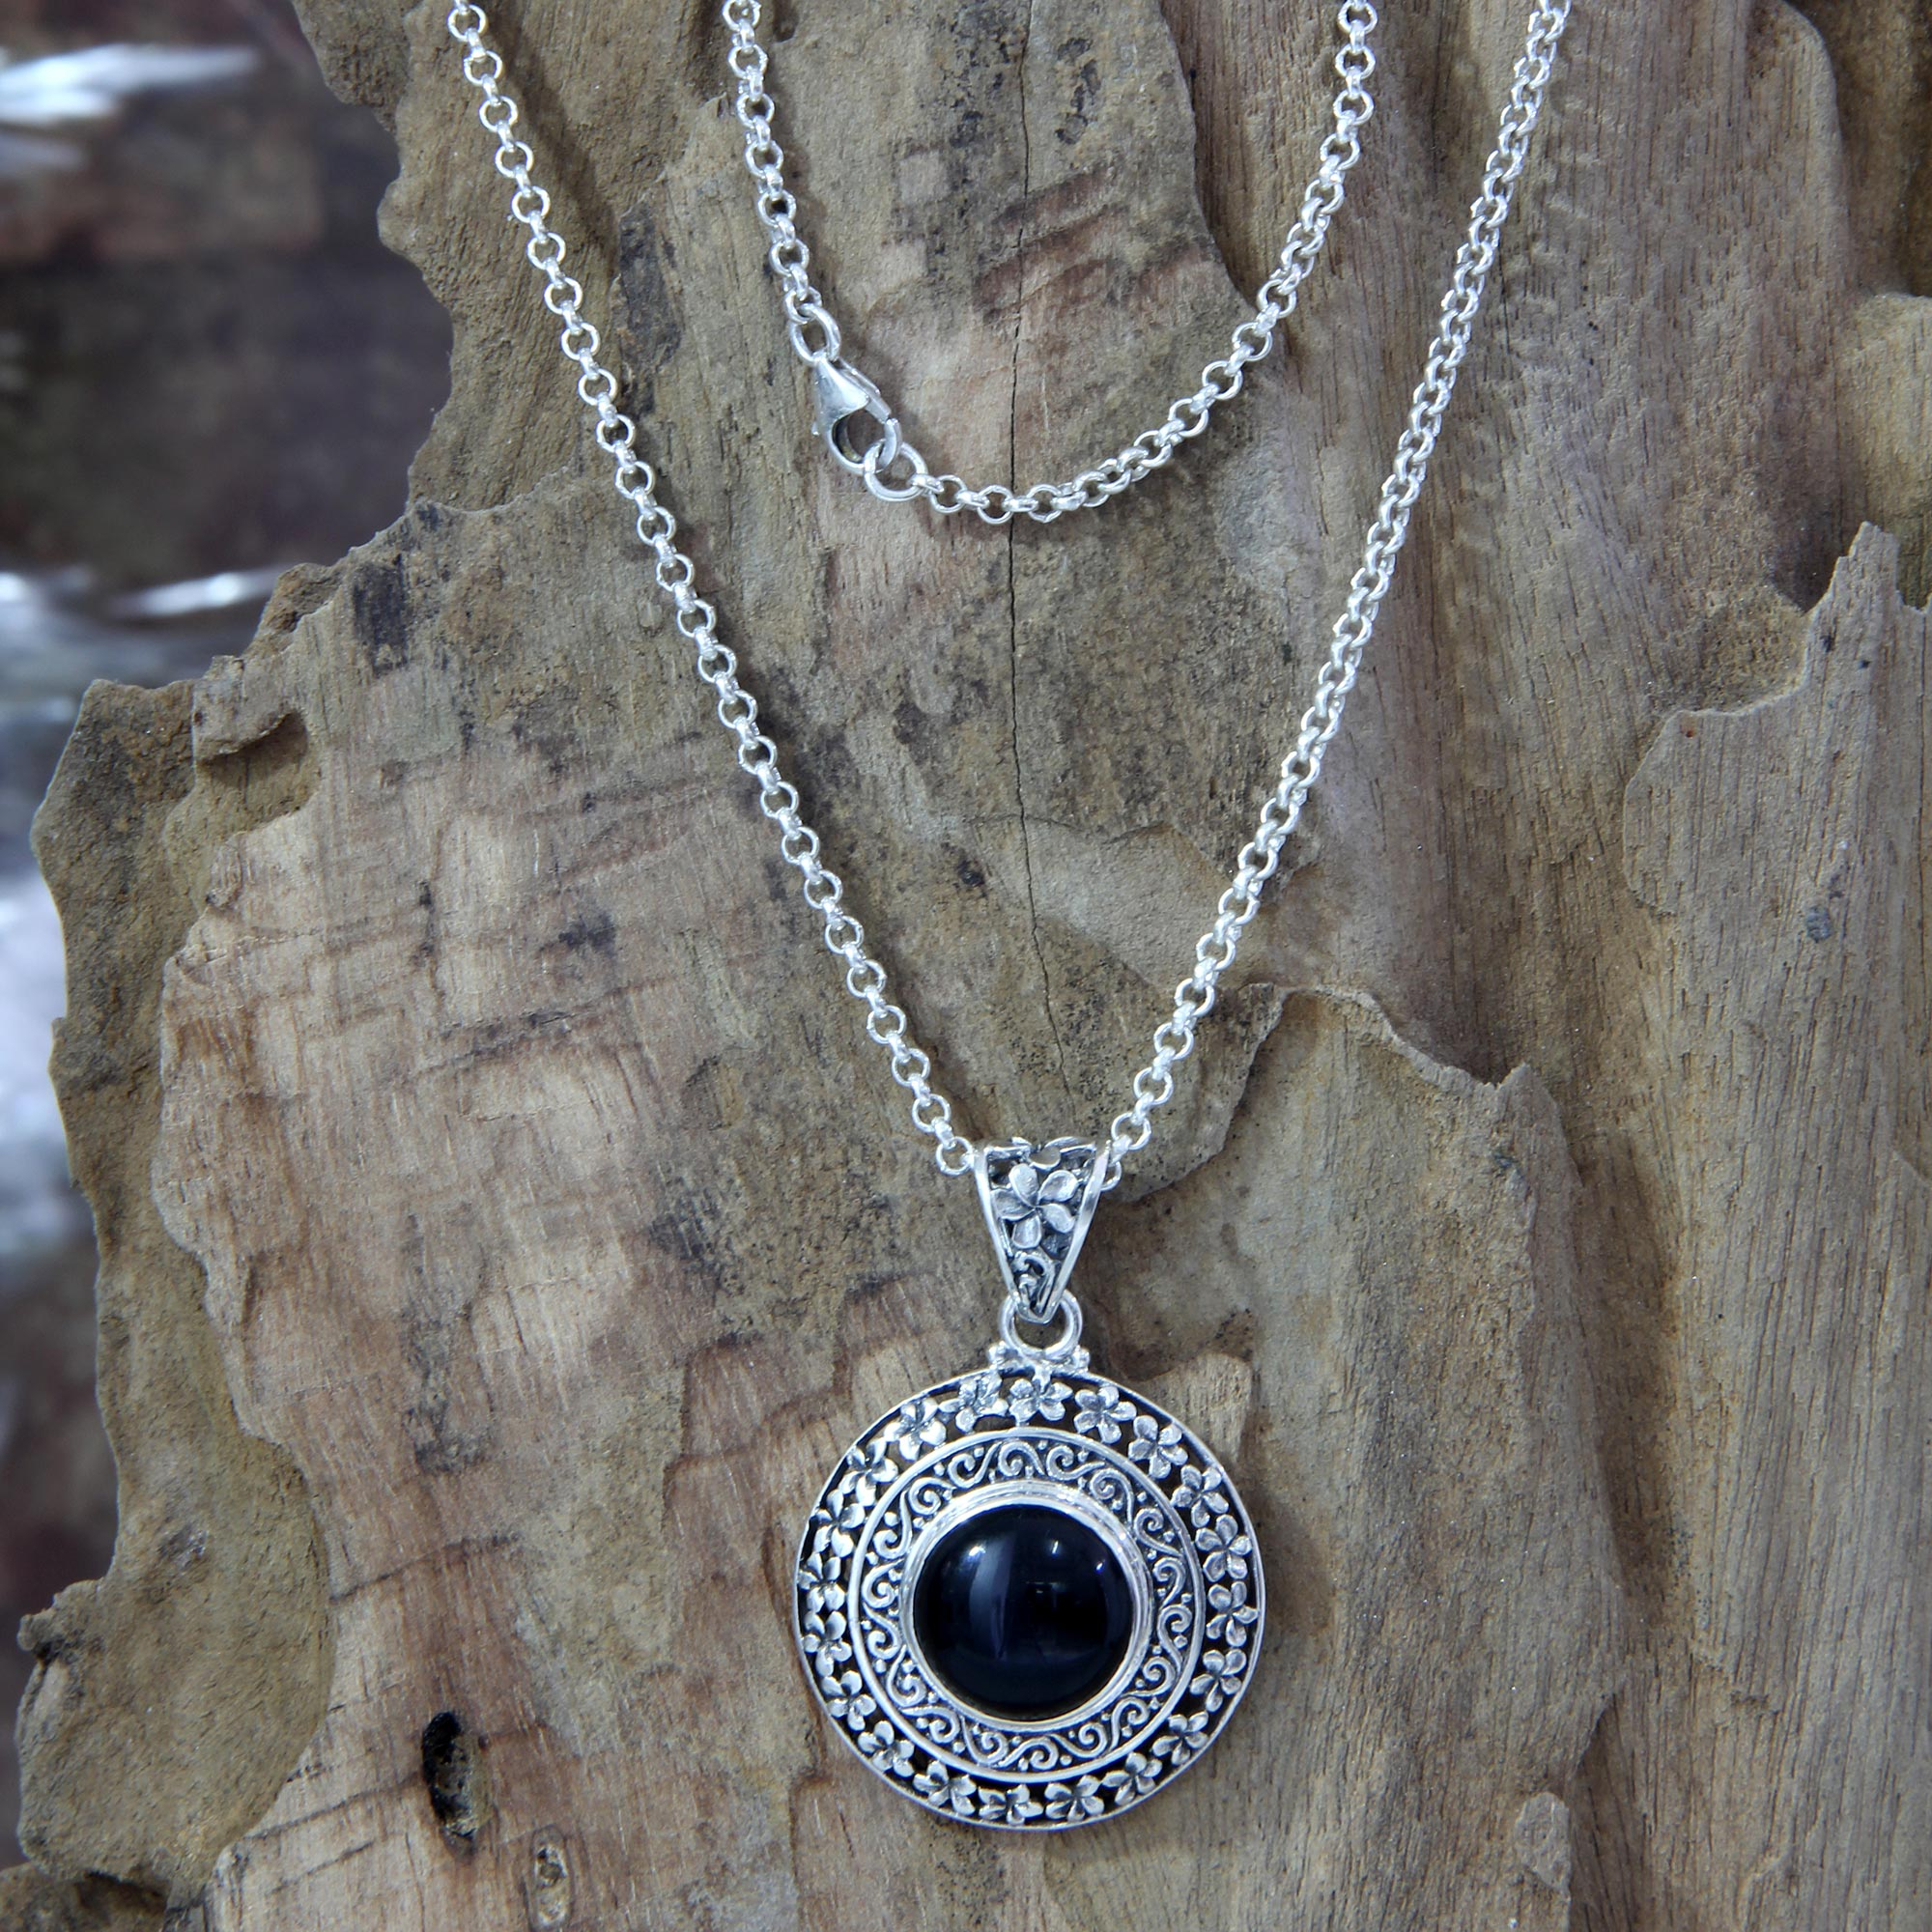 Floral Sterling Silver and Onyx Pendant Necklace - Frangipani